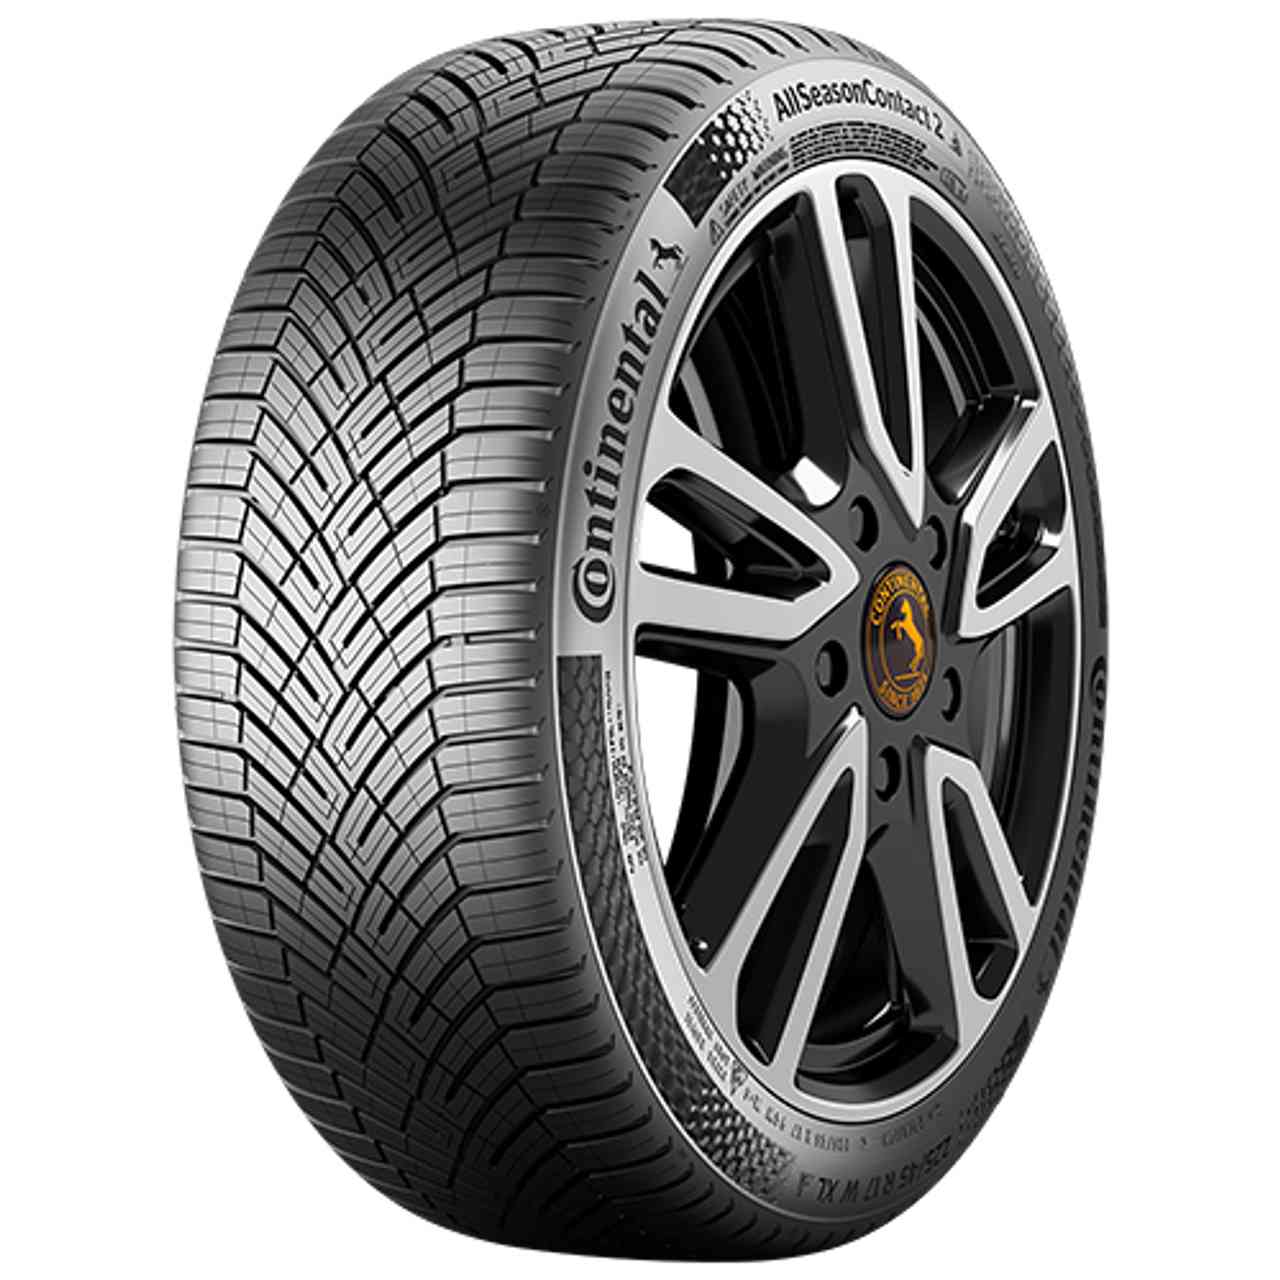 CONTINENTAL ALLSEASONCONTACT 2 (EVc) 255/50R19 107W FR BSW